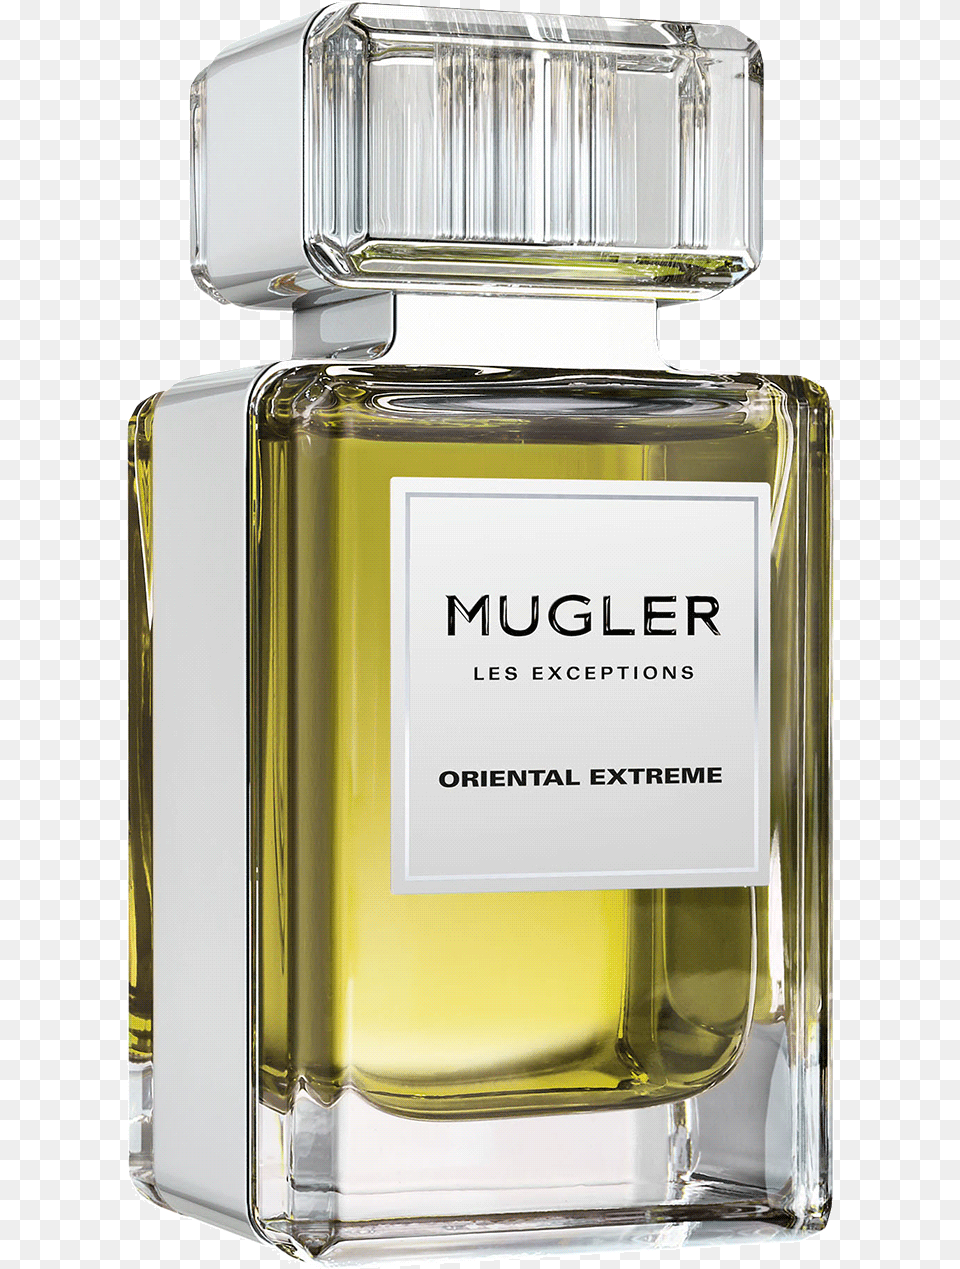 Les Exceptions Oriental Express Mugler Perfume Les Exceptions, Bottle, Cosmetics Png Image